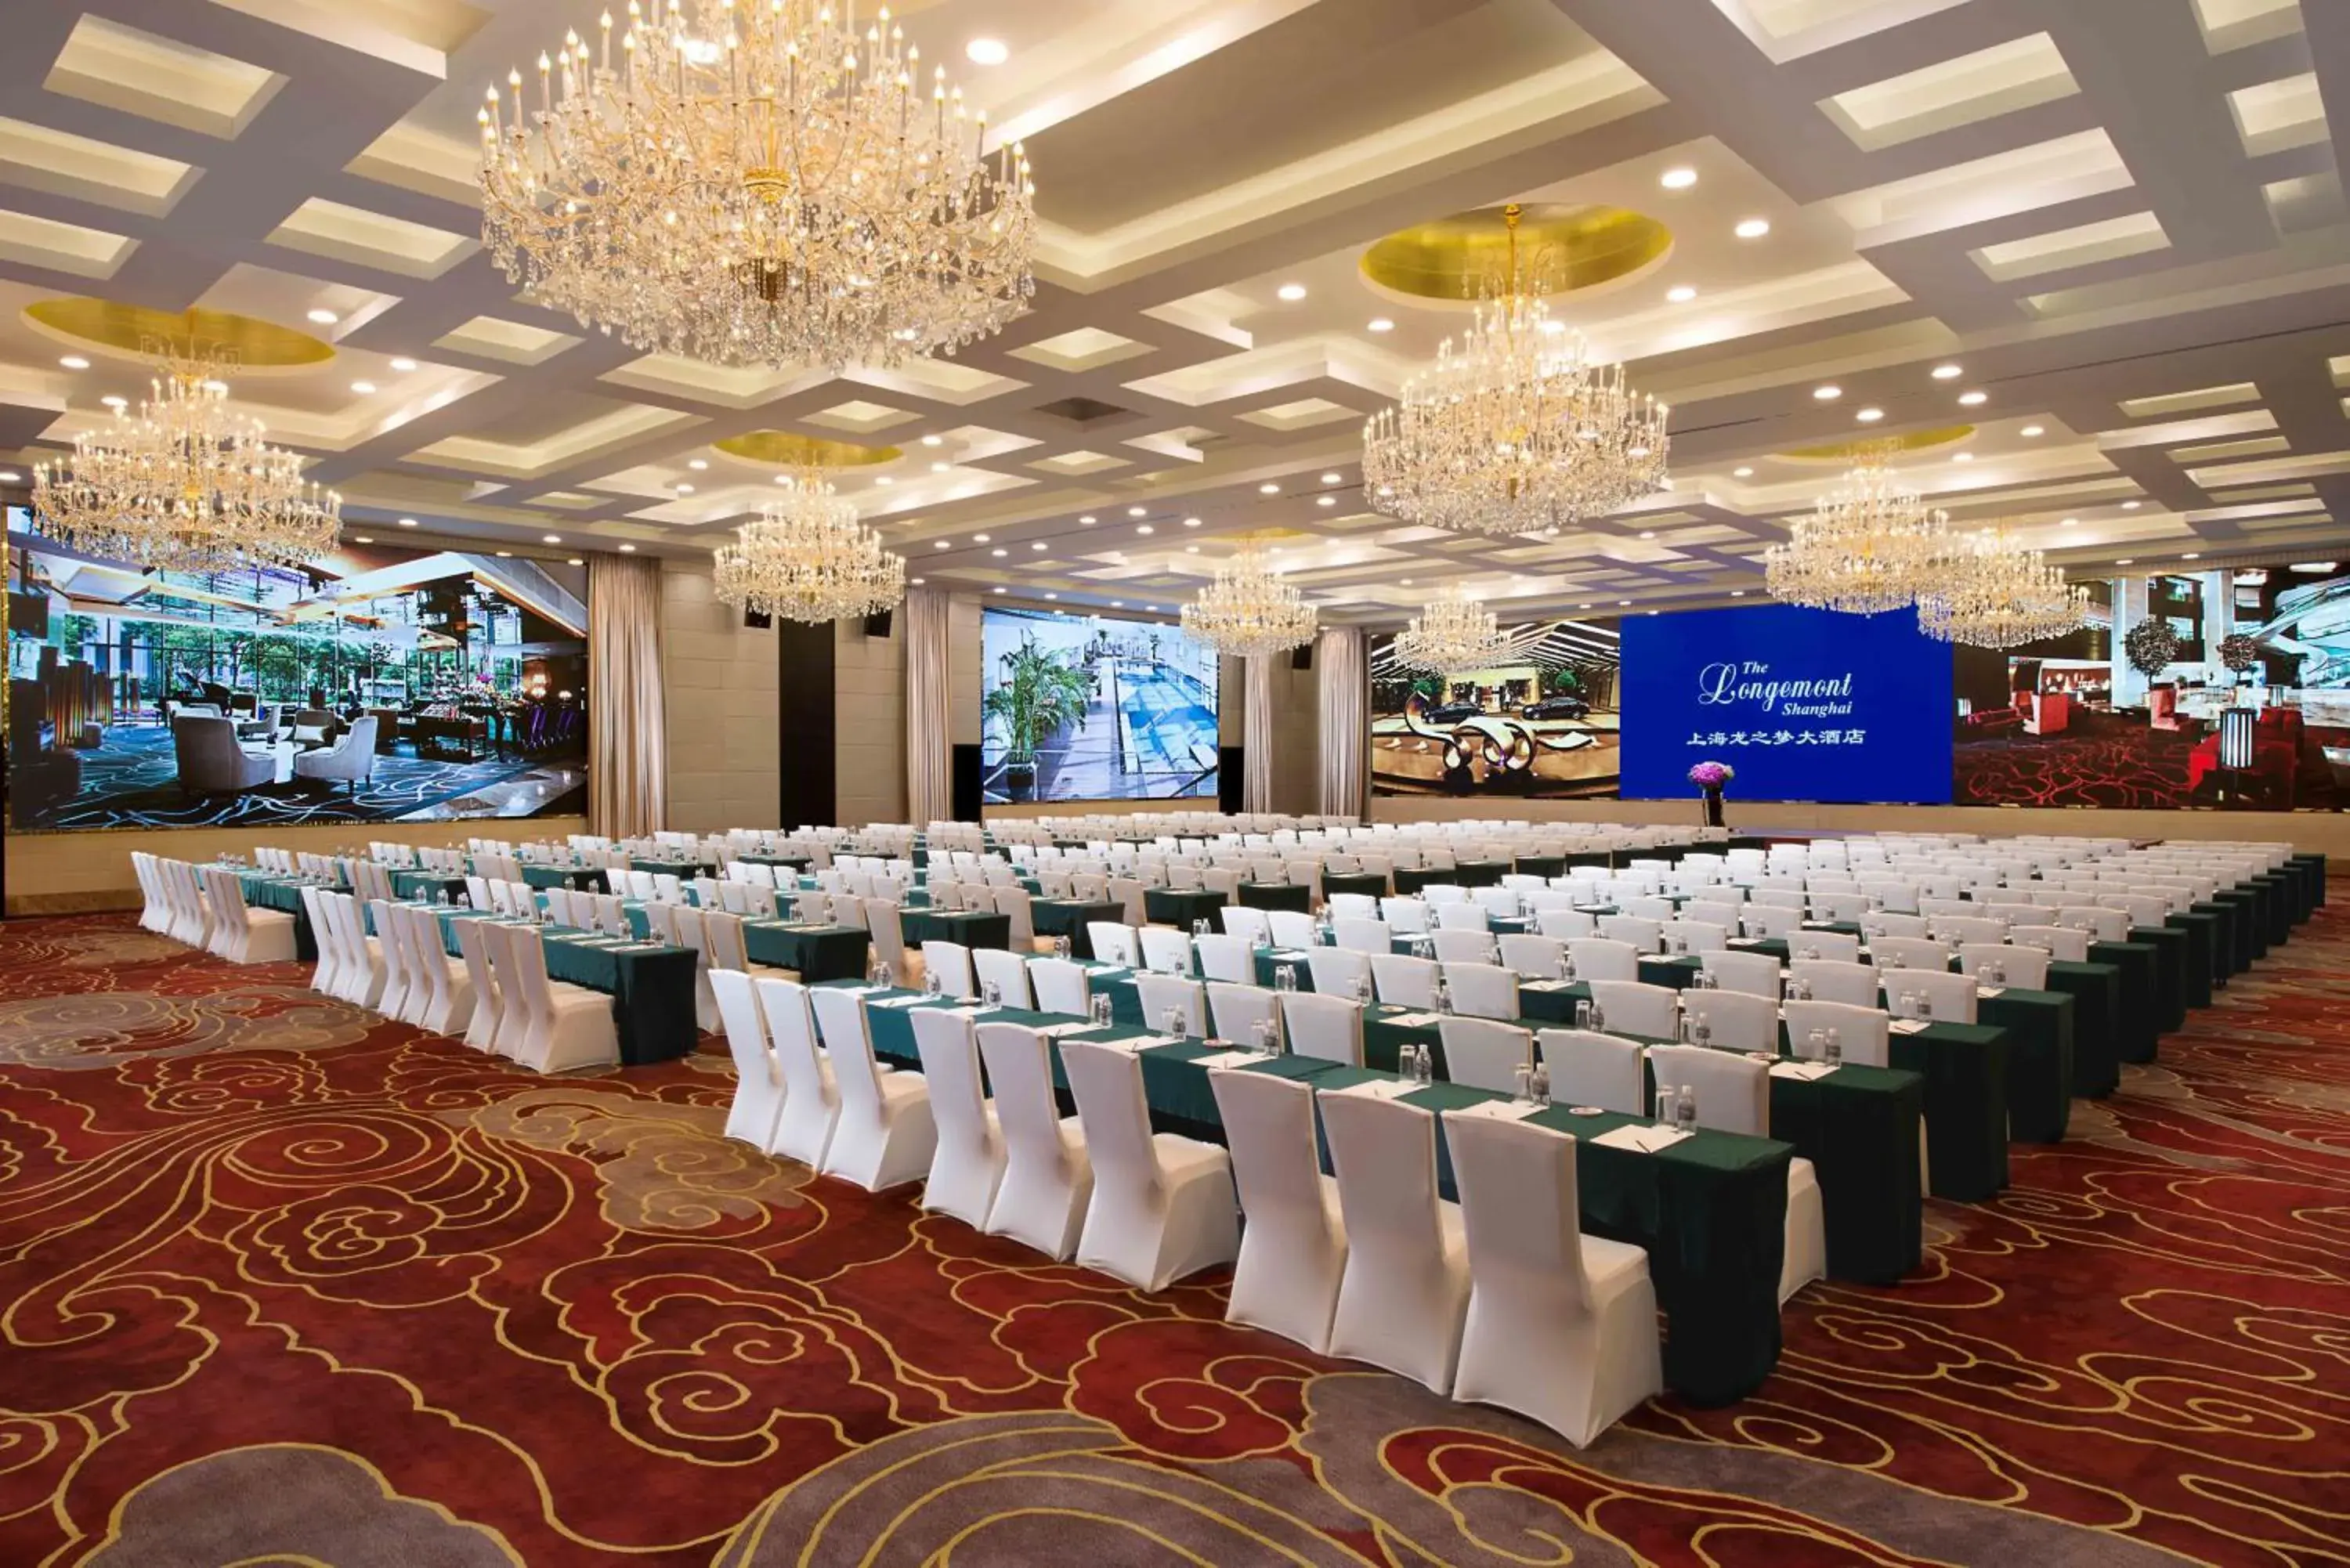 Business facilities, Banquet Facilities in The Longemont Shanghai